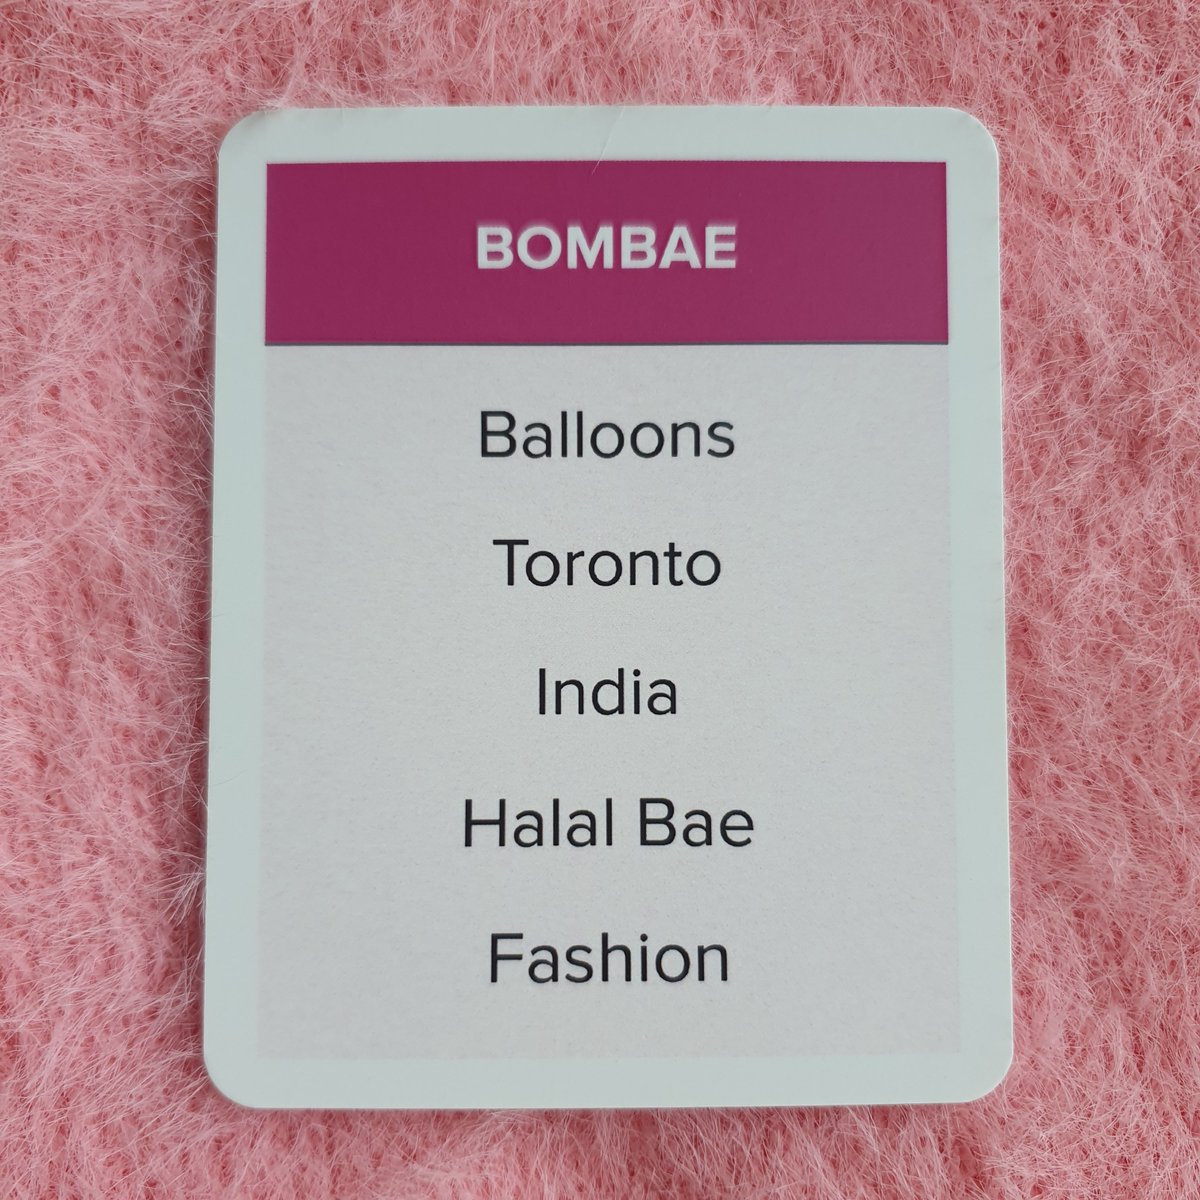 Describe the queen without using any of the other words #DragRace #DragRaceTaboo #DragRaceCanada @ItsBomBae